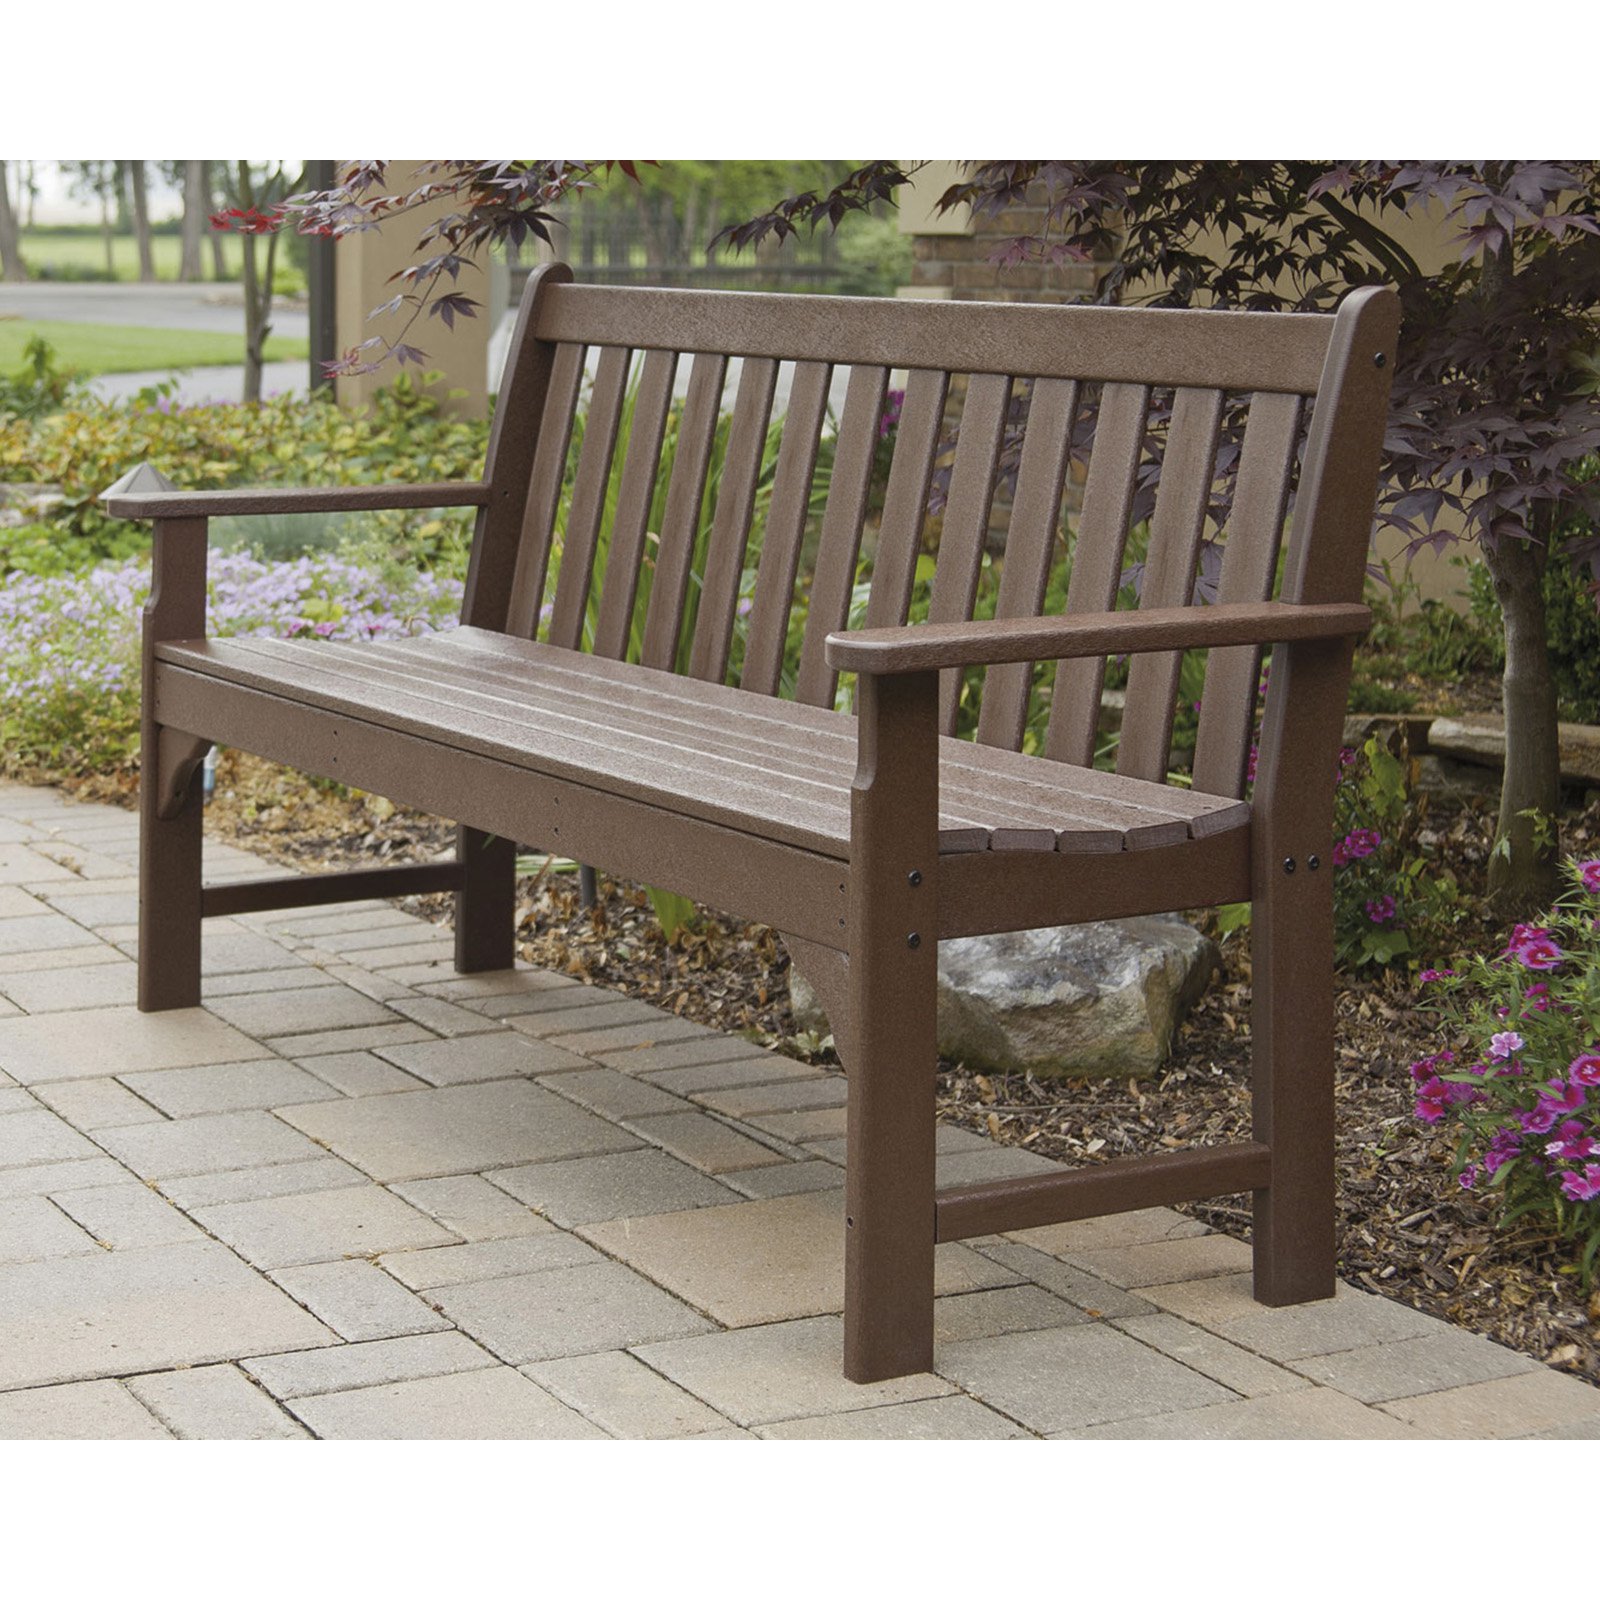 POLYWOOD Vineyard 48" Recycled Plastic Garden Bench - image 4 of 9